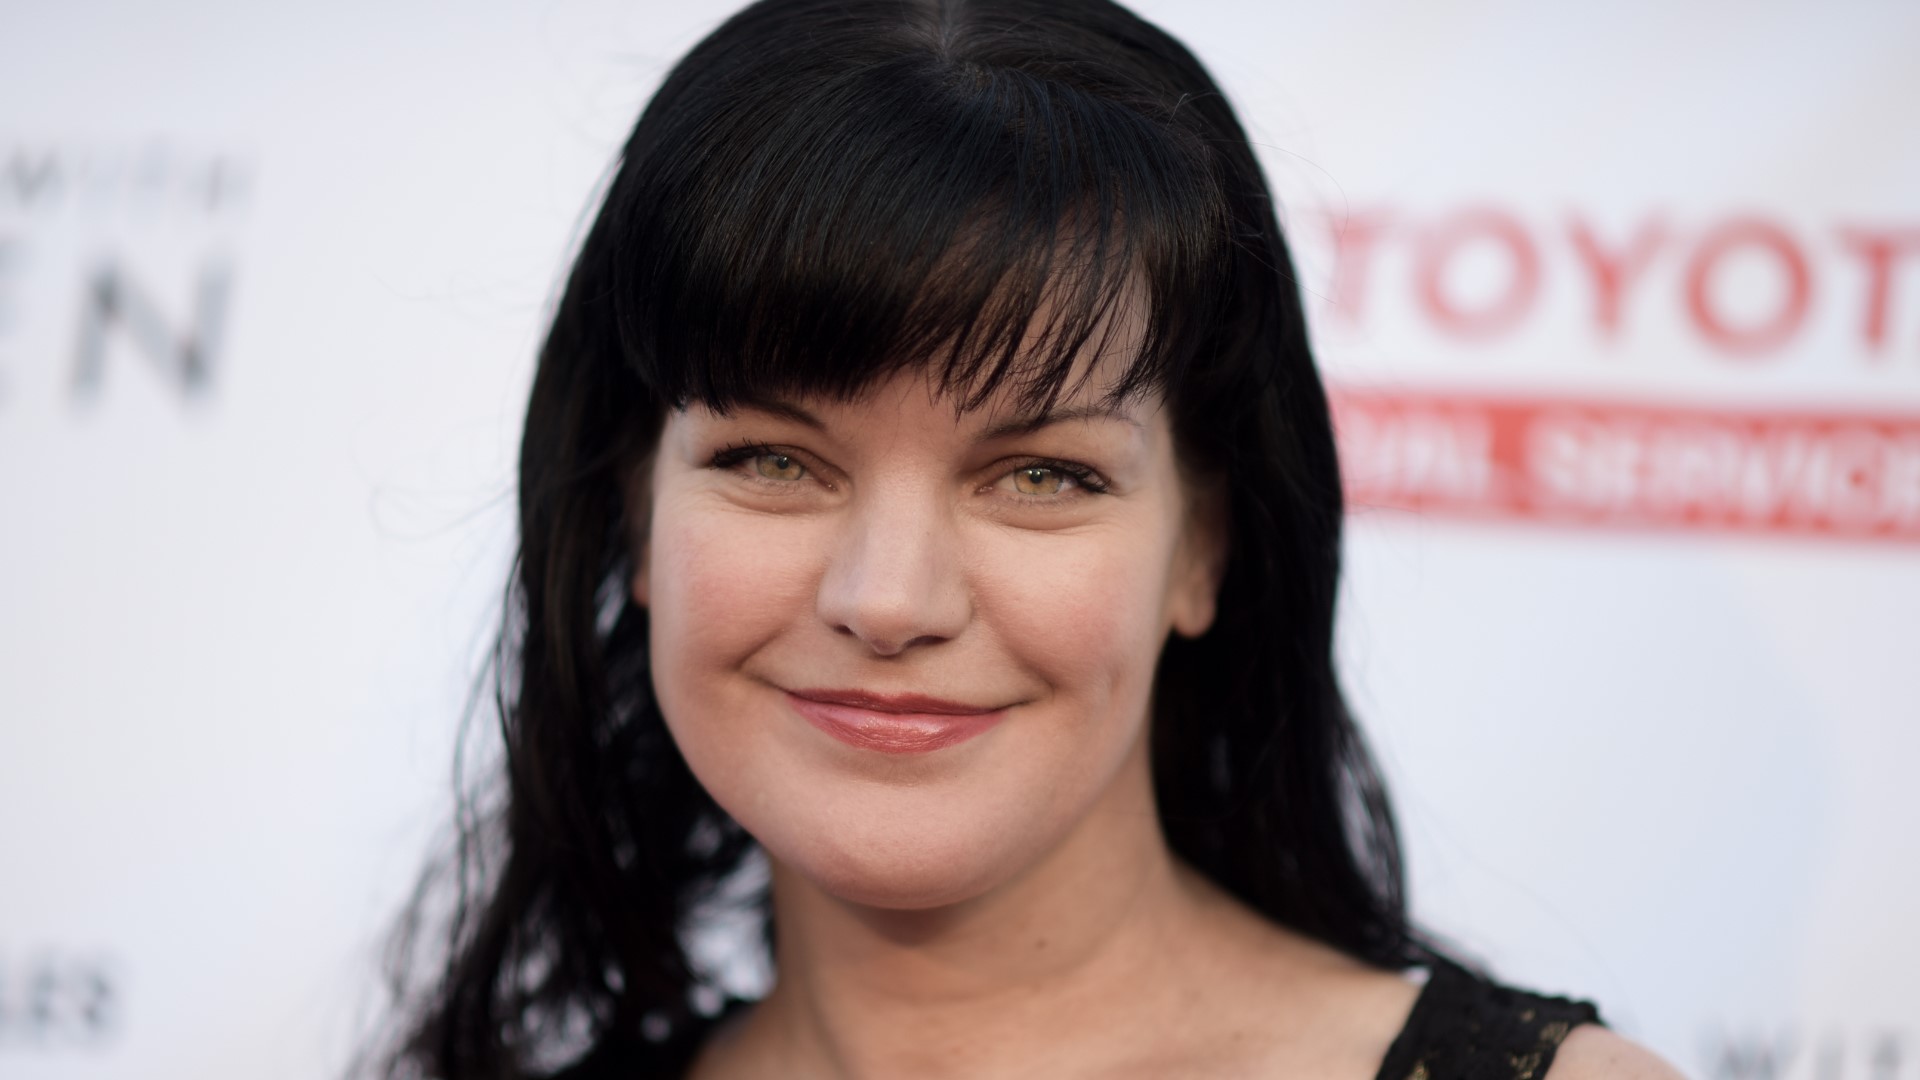 Former "NCIS" star Pauley Perrette says she will never return to the show, going so far as to say she was "terrified" of her former co-star Mark Harmon.